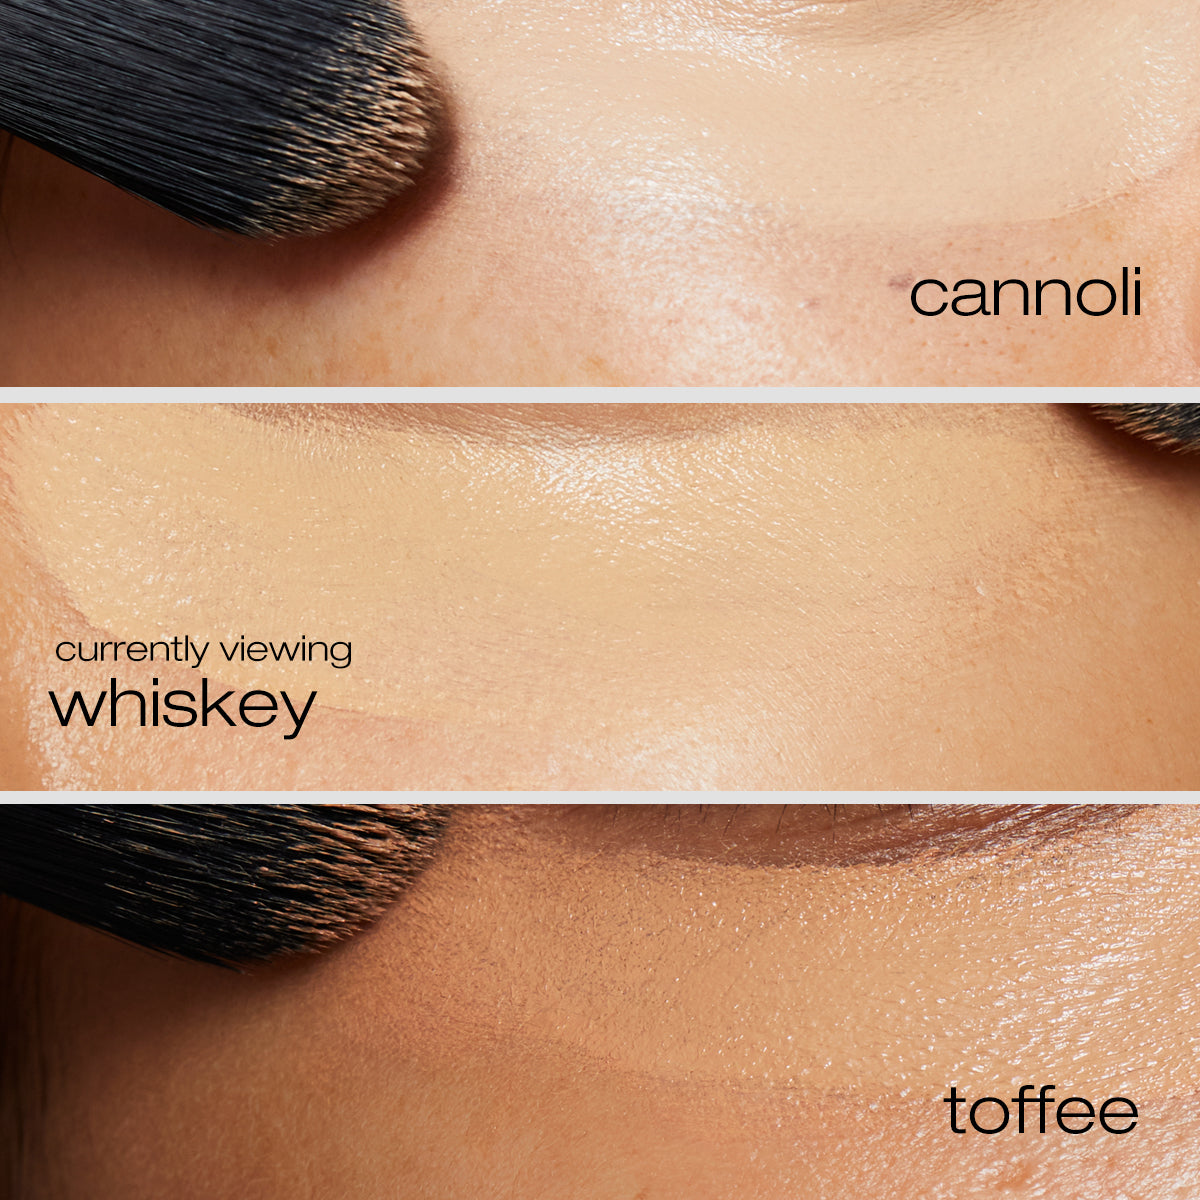 Cannoli, whiskey, and toffee applied to undereyes